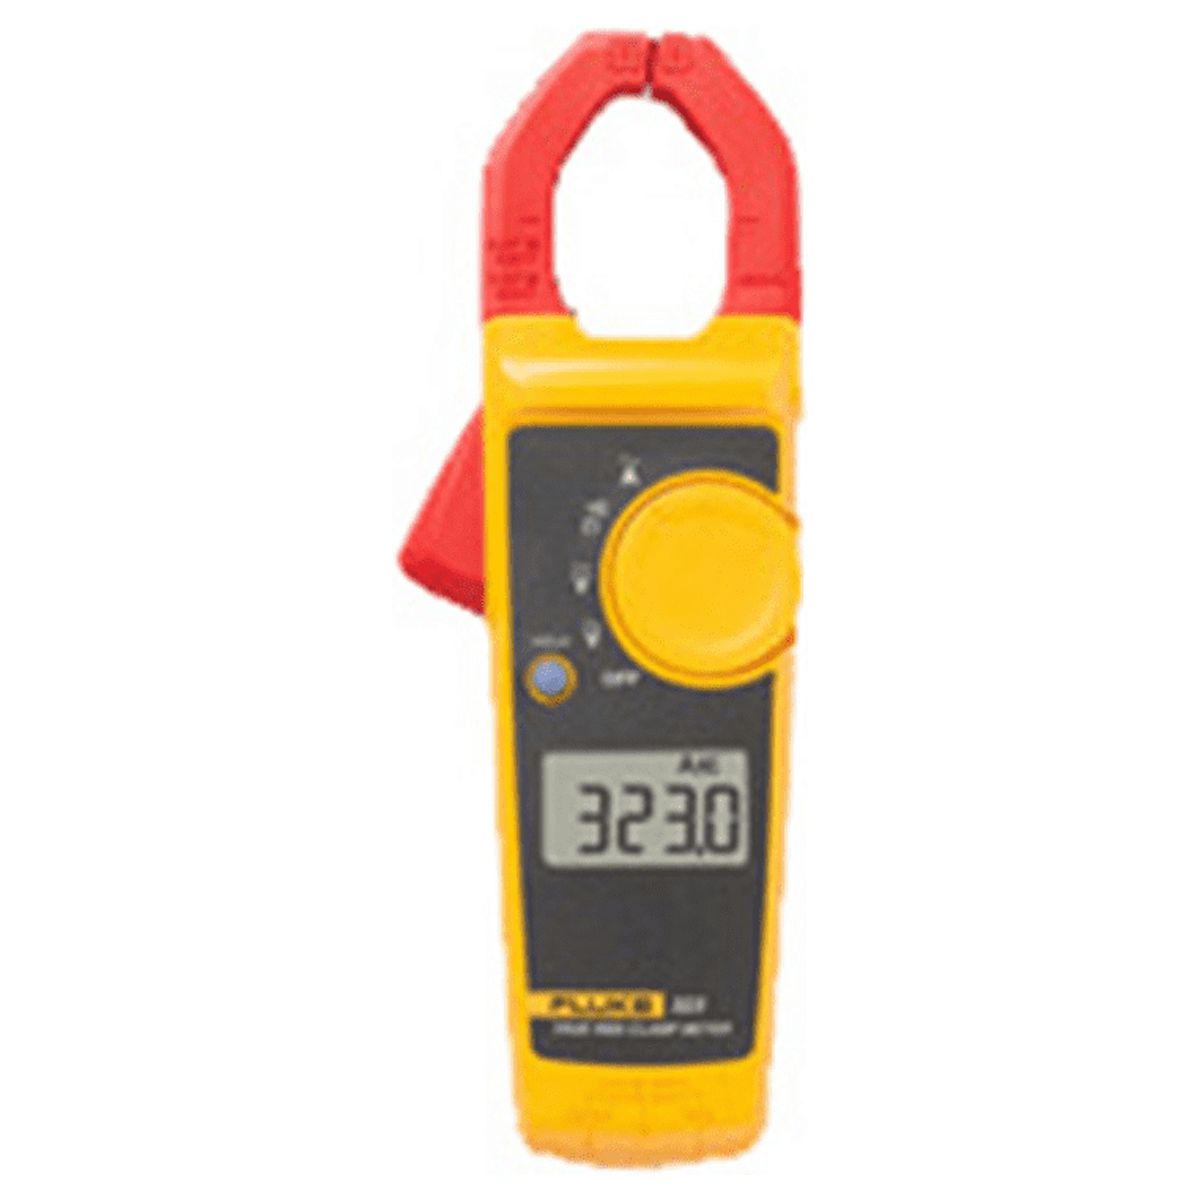 Clamp Meter 400A 65-400 HZ - image 1 of 2